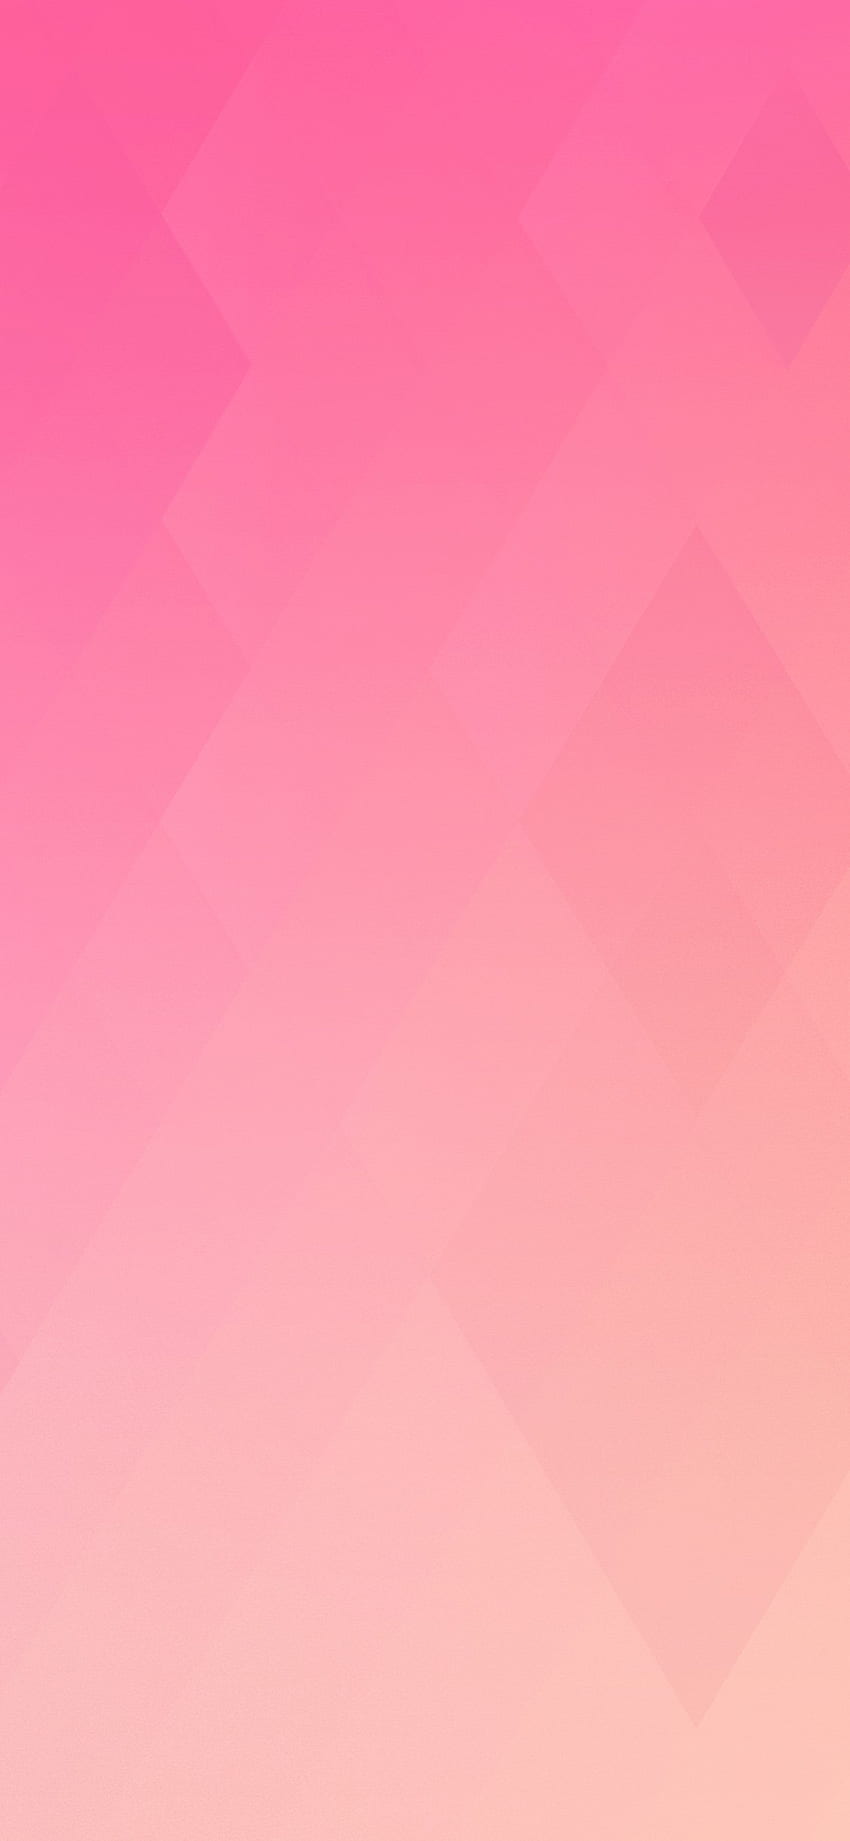 iPhone . polygon art pink, Cool Pink Abstract HD phone wallpaper